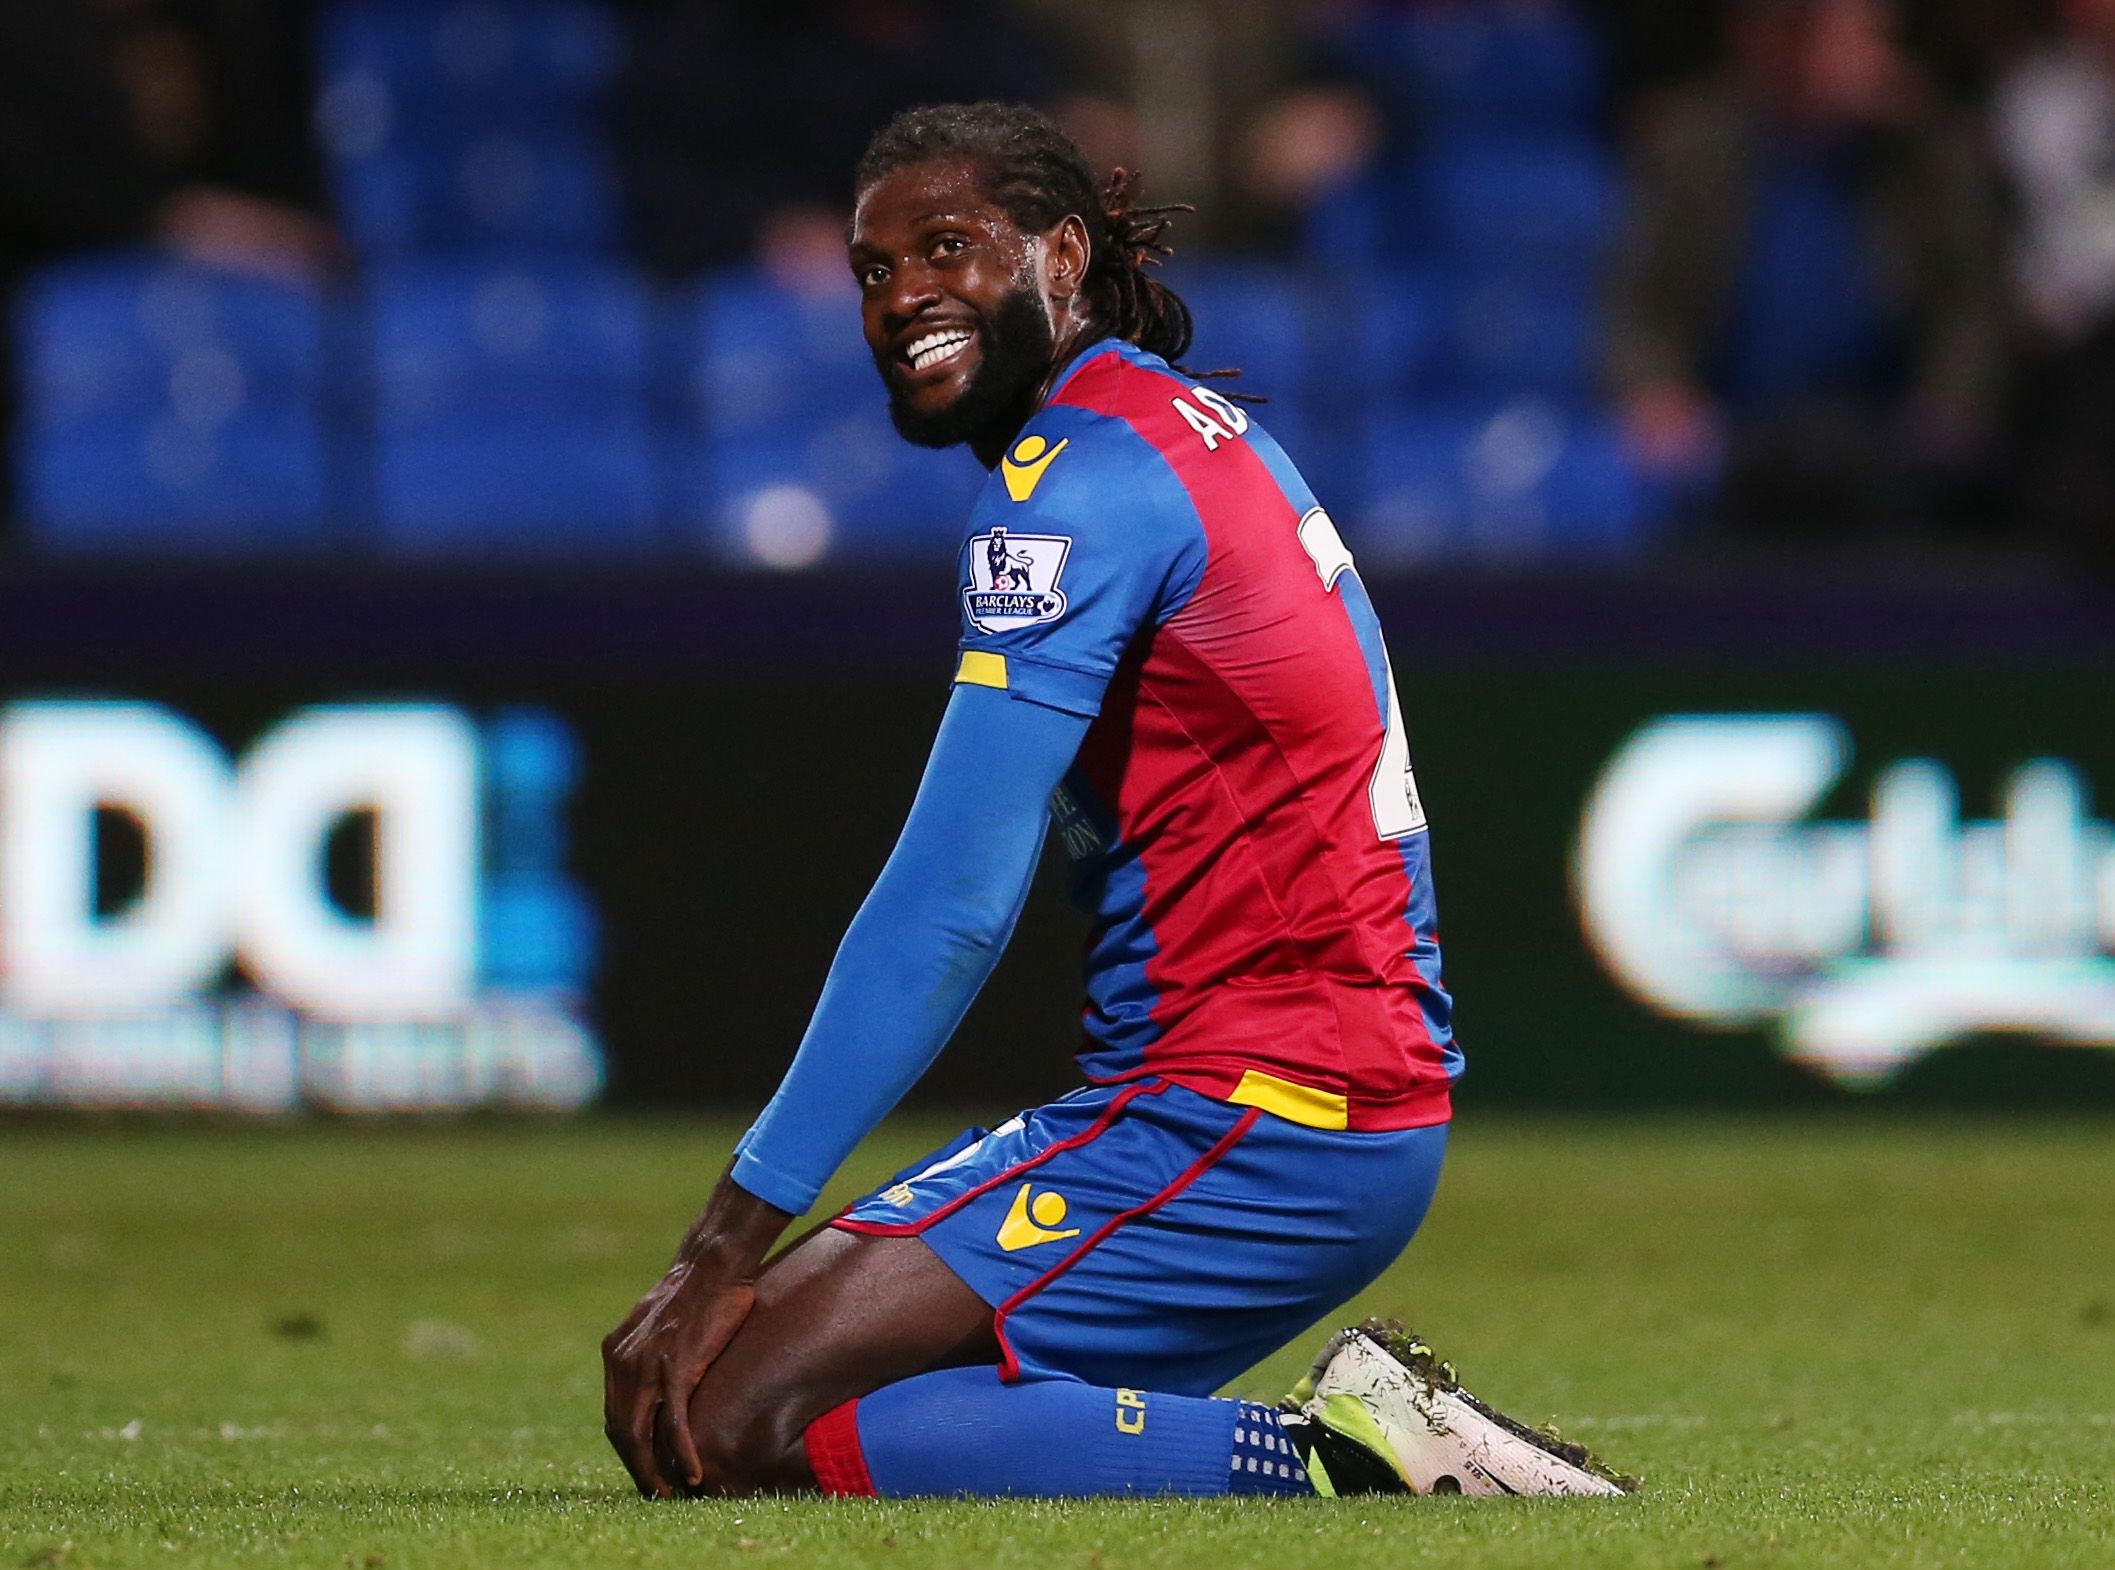 Football Soccer - Crystal Palace v Everton - Barclays Premier League - Selhurst Park - 13/4/16
Crystal Palace's Emmanuel Adebayor looks dejected after missing a chance to score
Action Images via Reuters / Matthew Childs
Livepic
EDITORIAL USE ONLY. No use with unauthorized audio, video, data, fixture lists, club/league logos or 